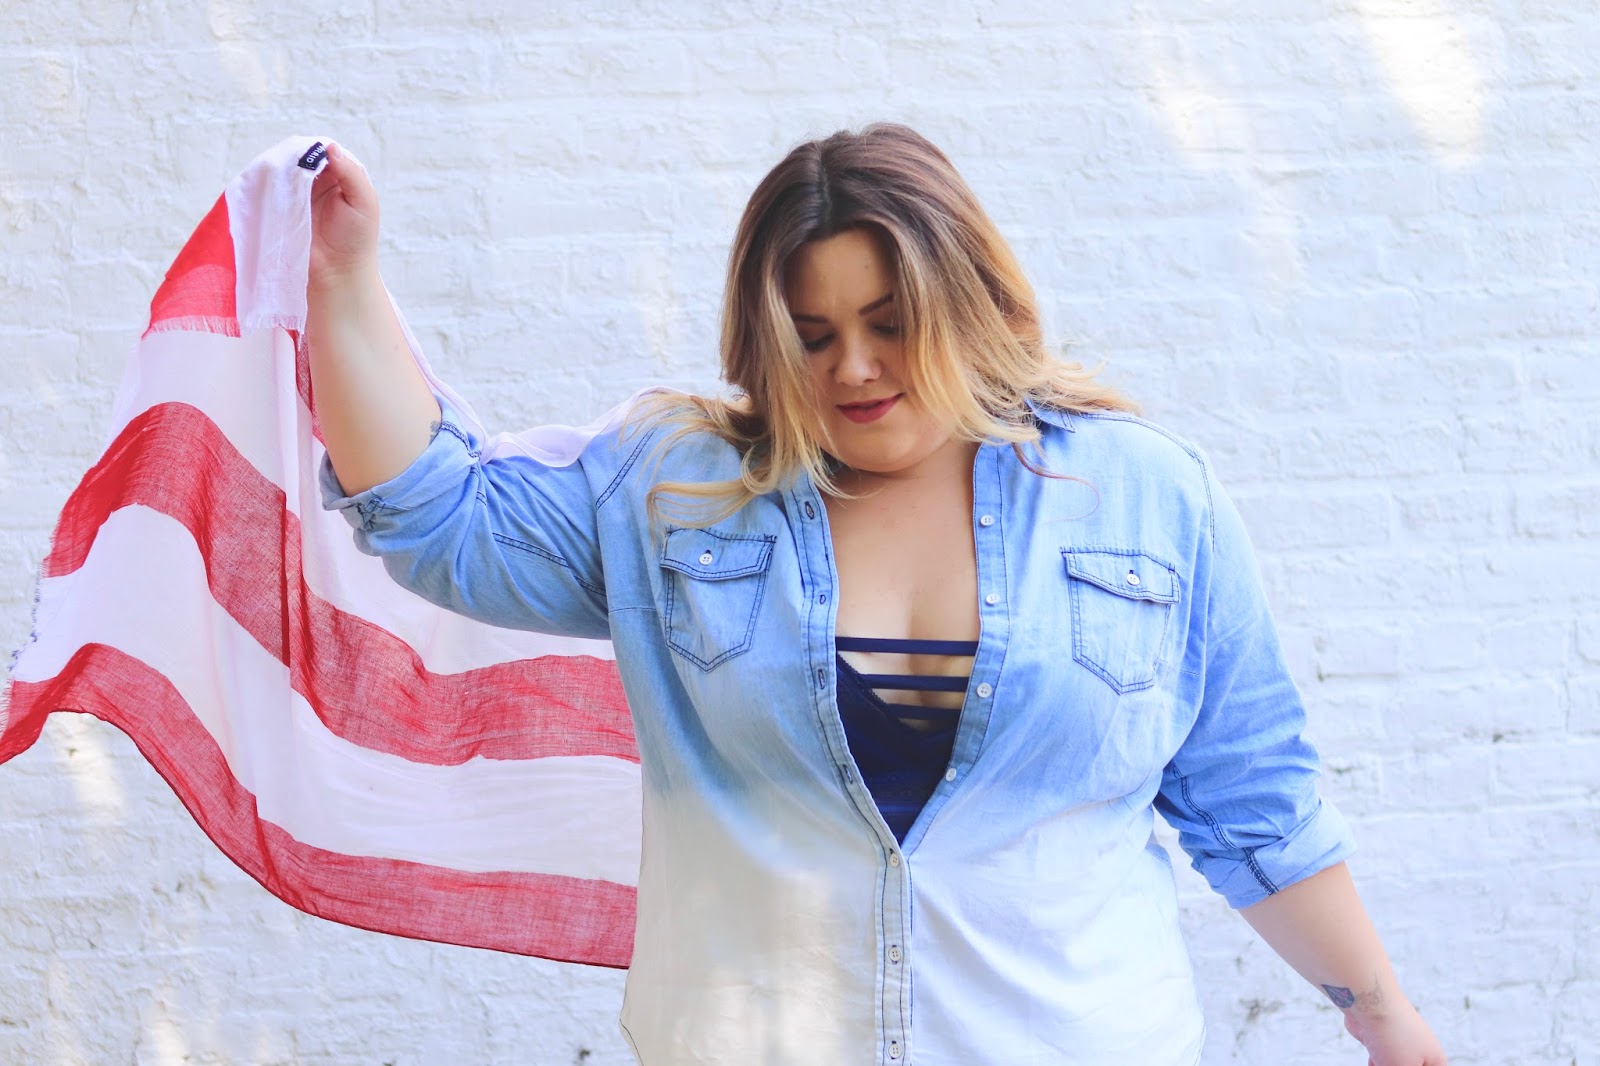 natalie craig, Natalie in the city, fourth of July outfits, 4th of July fashion, torrid, blogger review, summer fashion trends, American flag, fatshion, plus size fashion blogger, Chicago blogger, midwest blogger, curves and confidence, affordable plus size clothing, chambray, plus size white denim